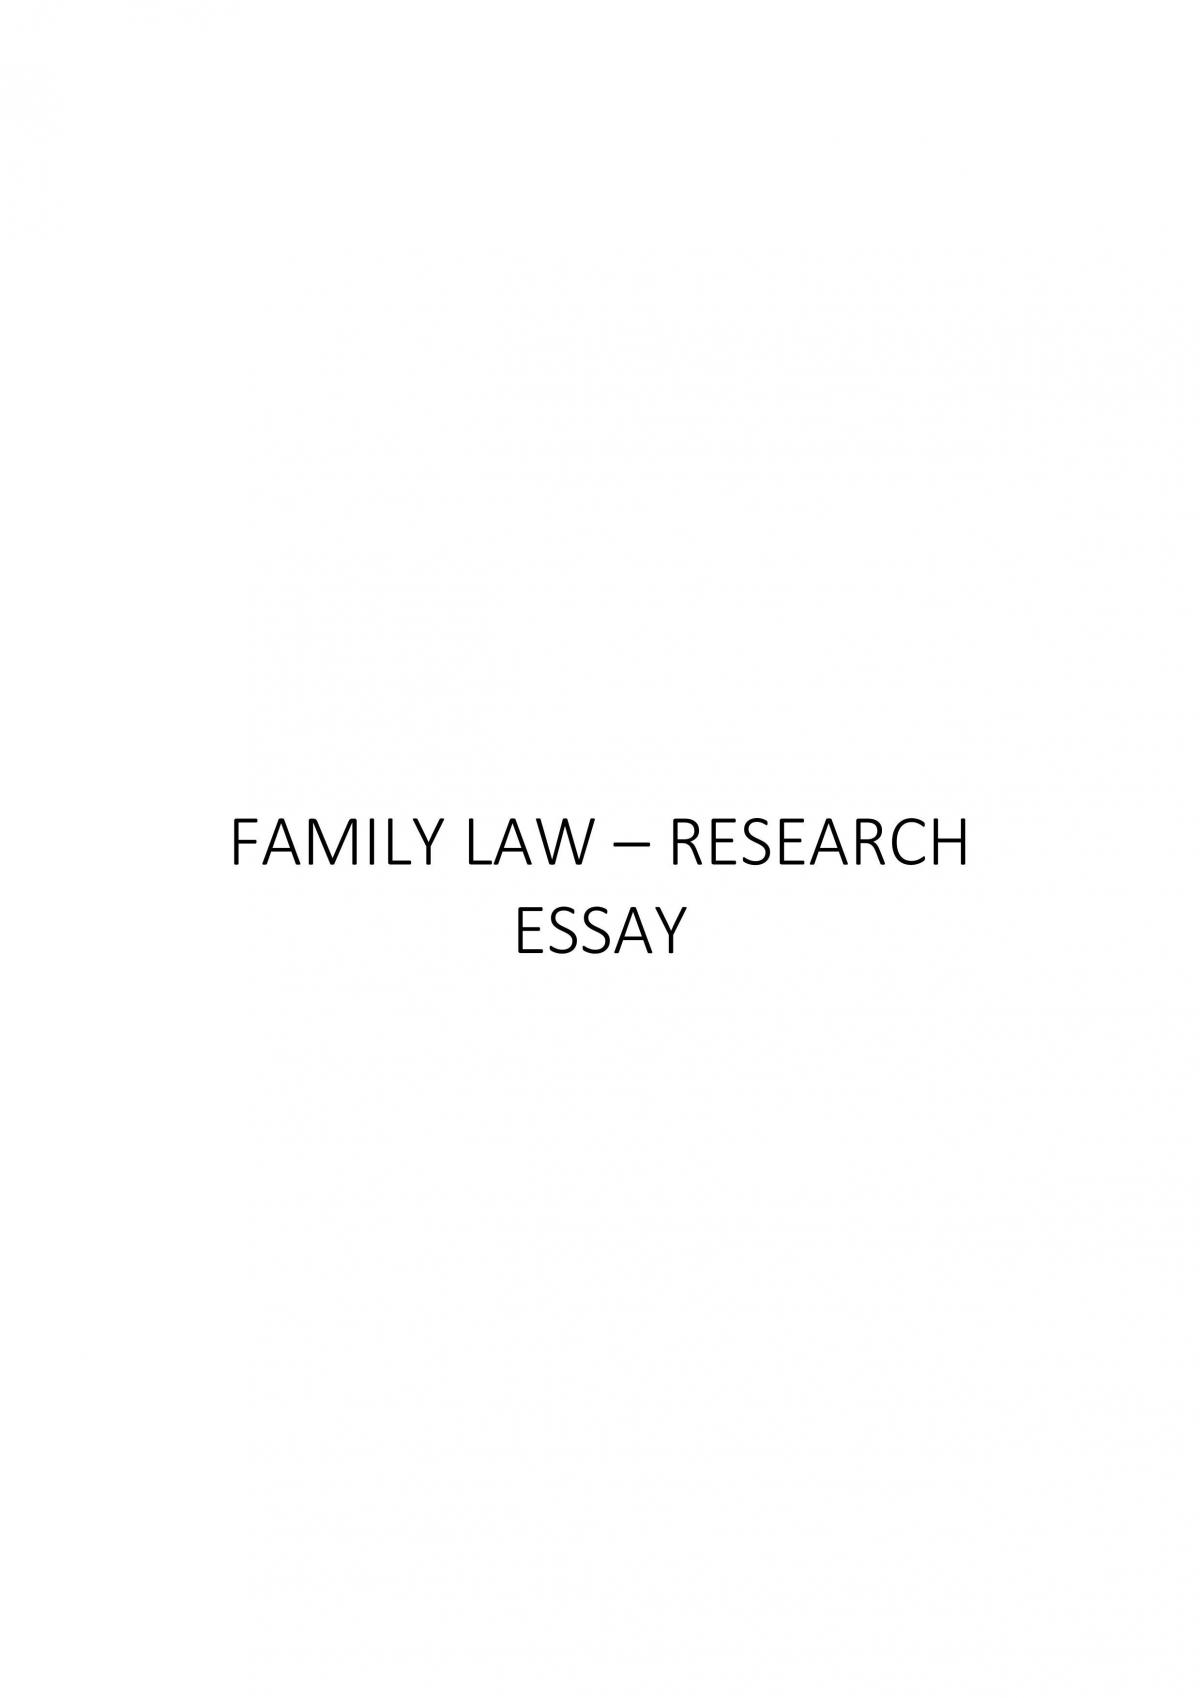 research topics on family law